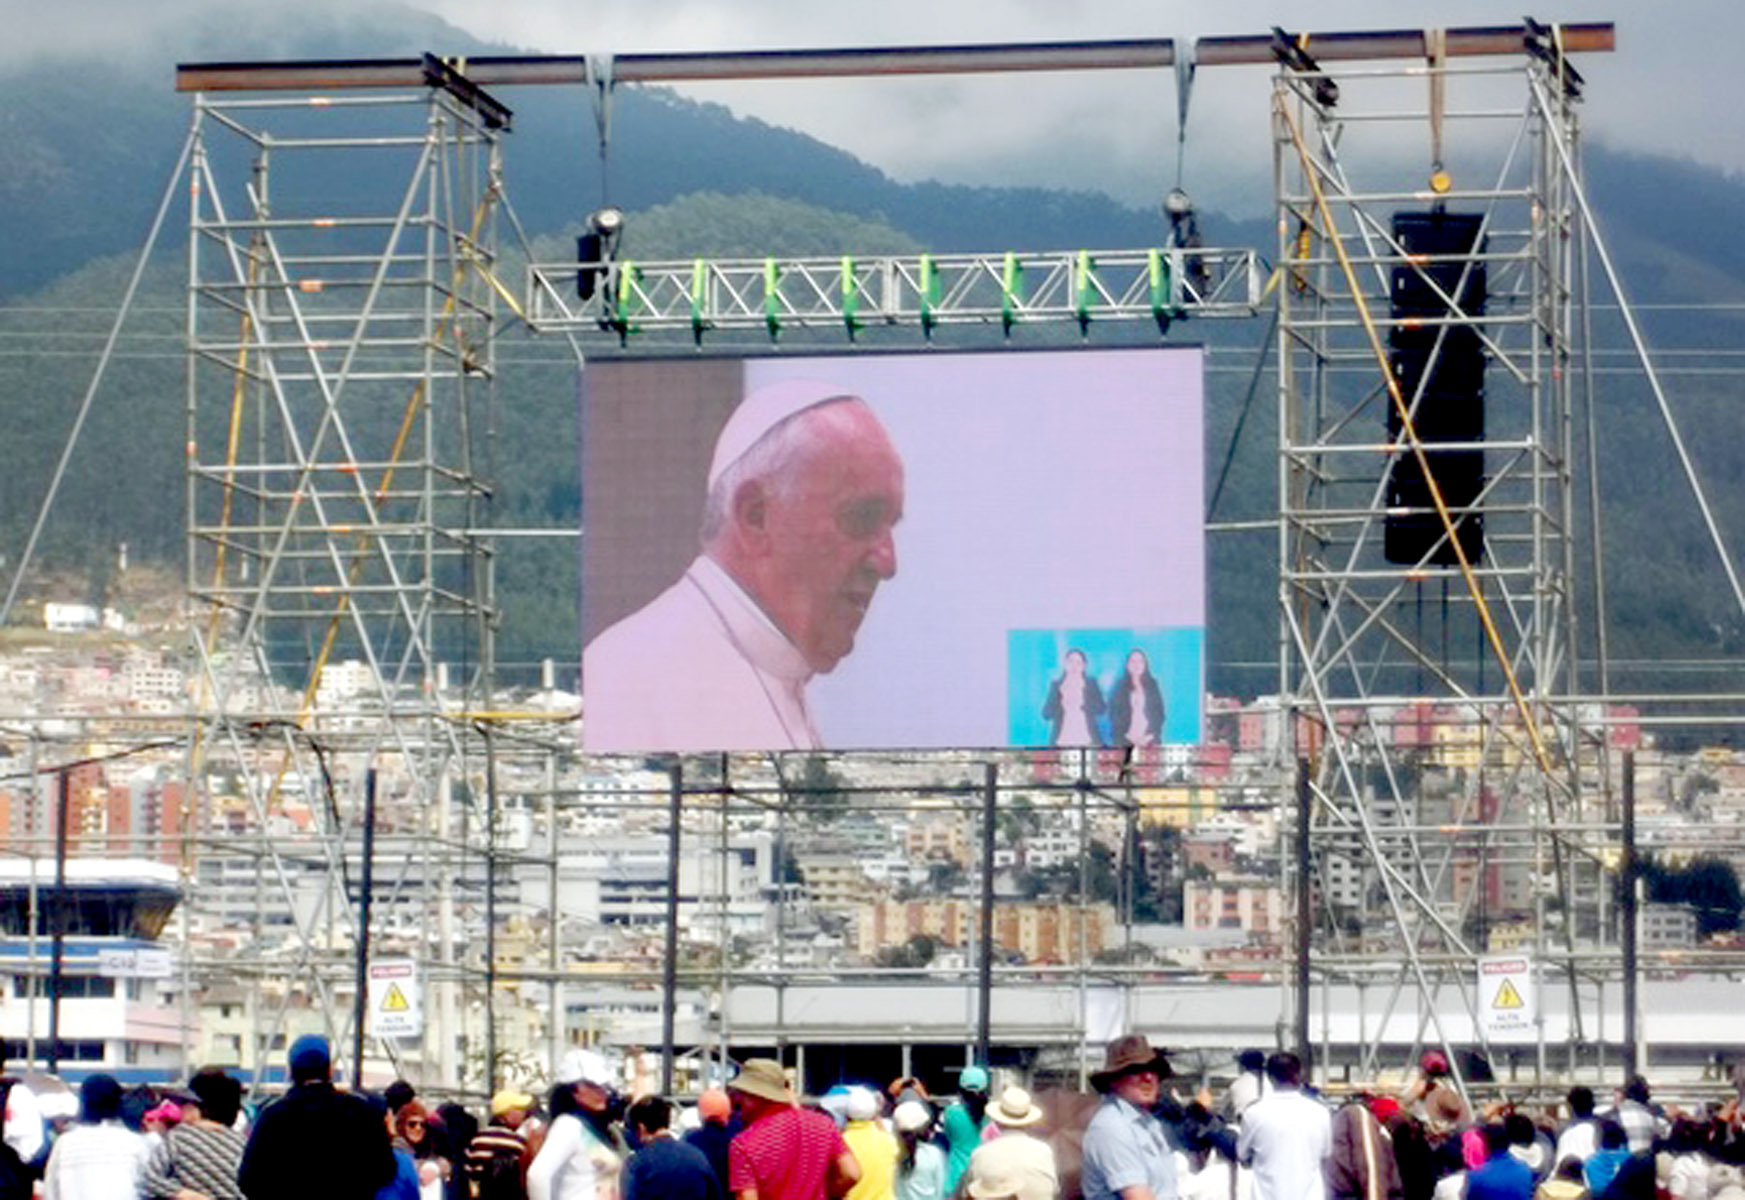 Nearly 1 million people gathered at an outdoor Mass at Parque Bicentenario in Quito, Ecuador, on Tuesday, July 7. Photo credit: Sondra Holden